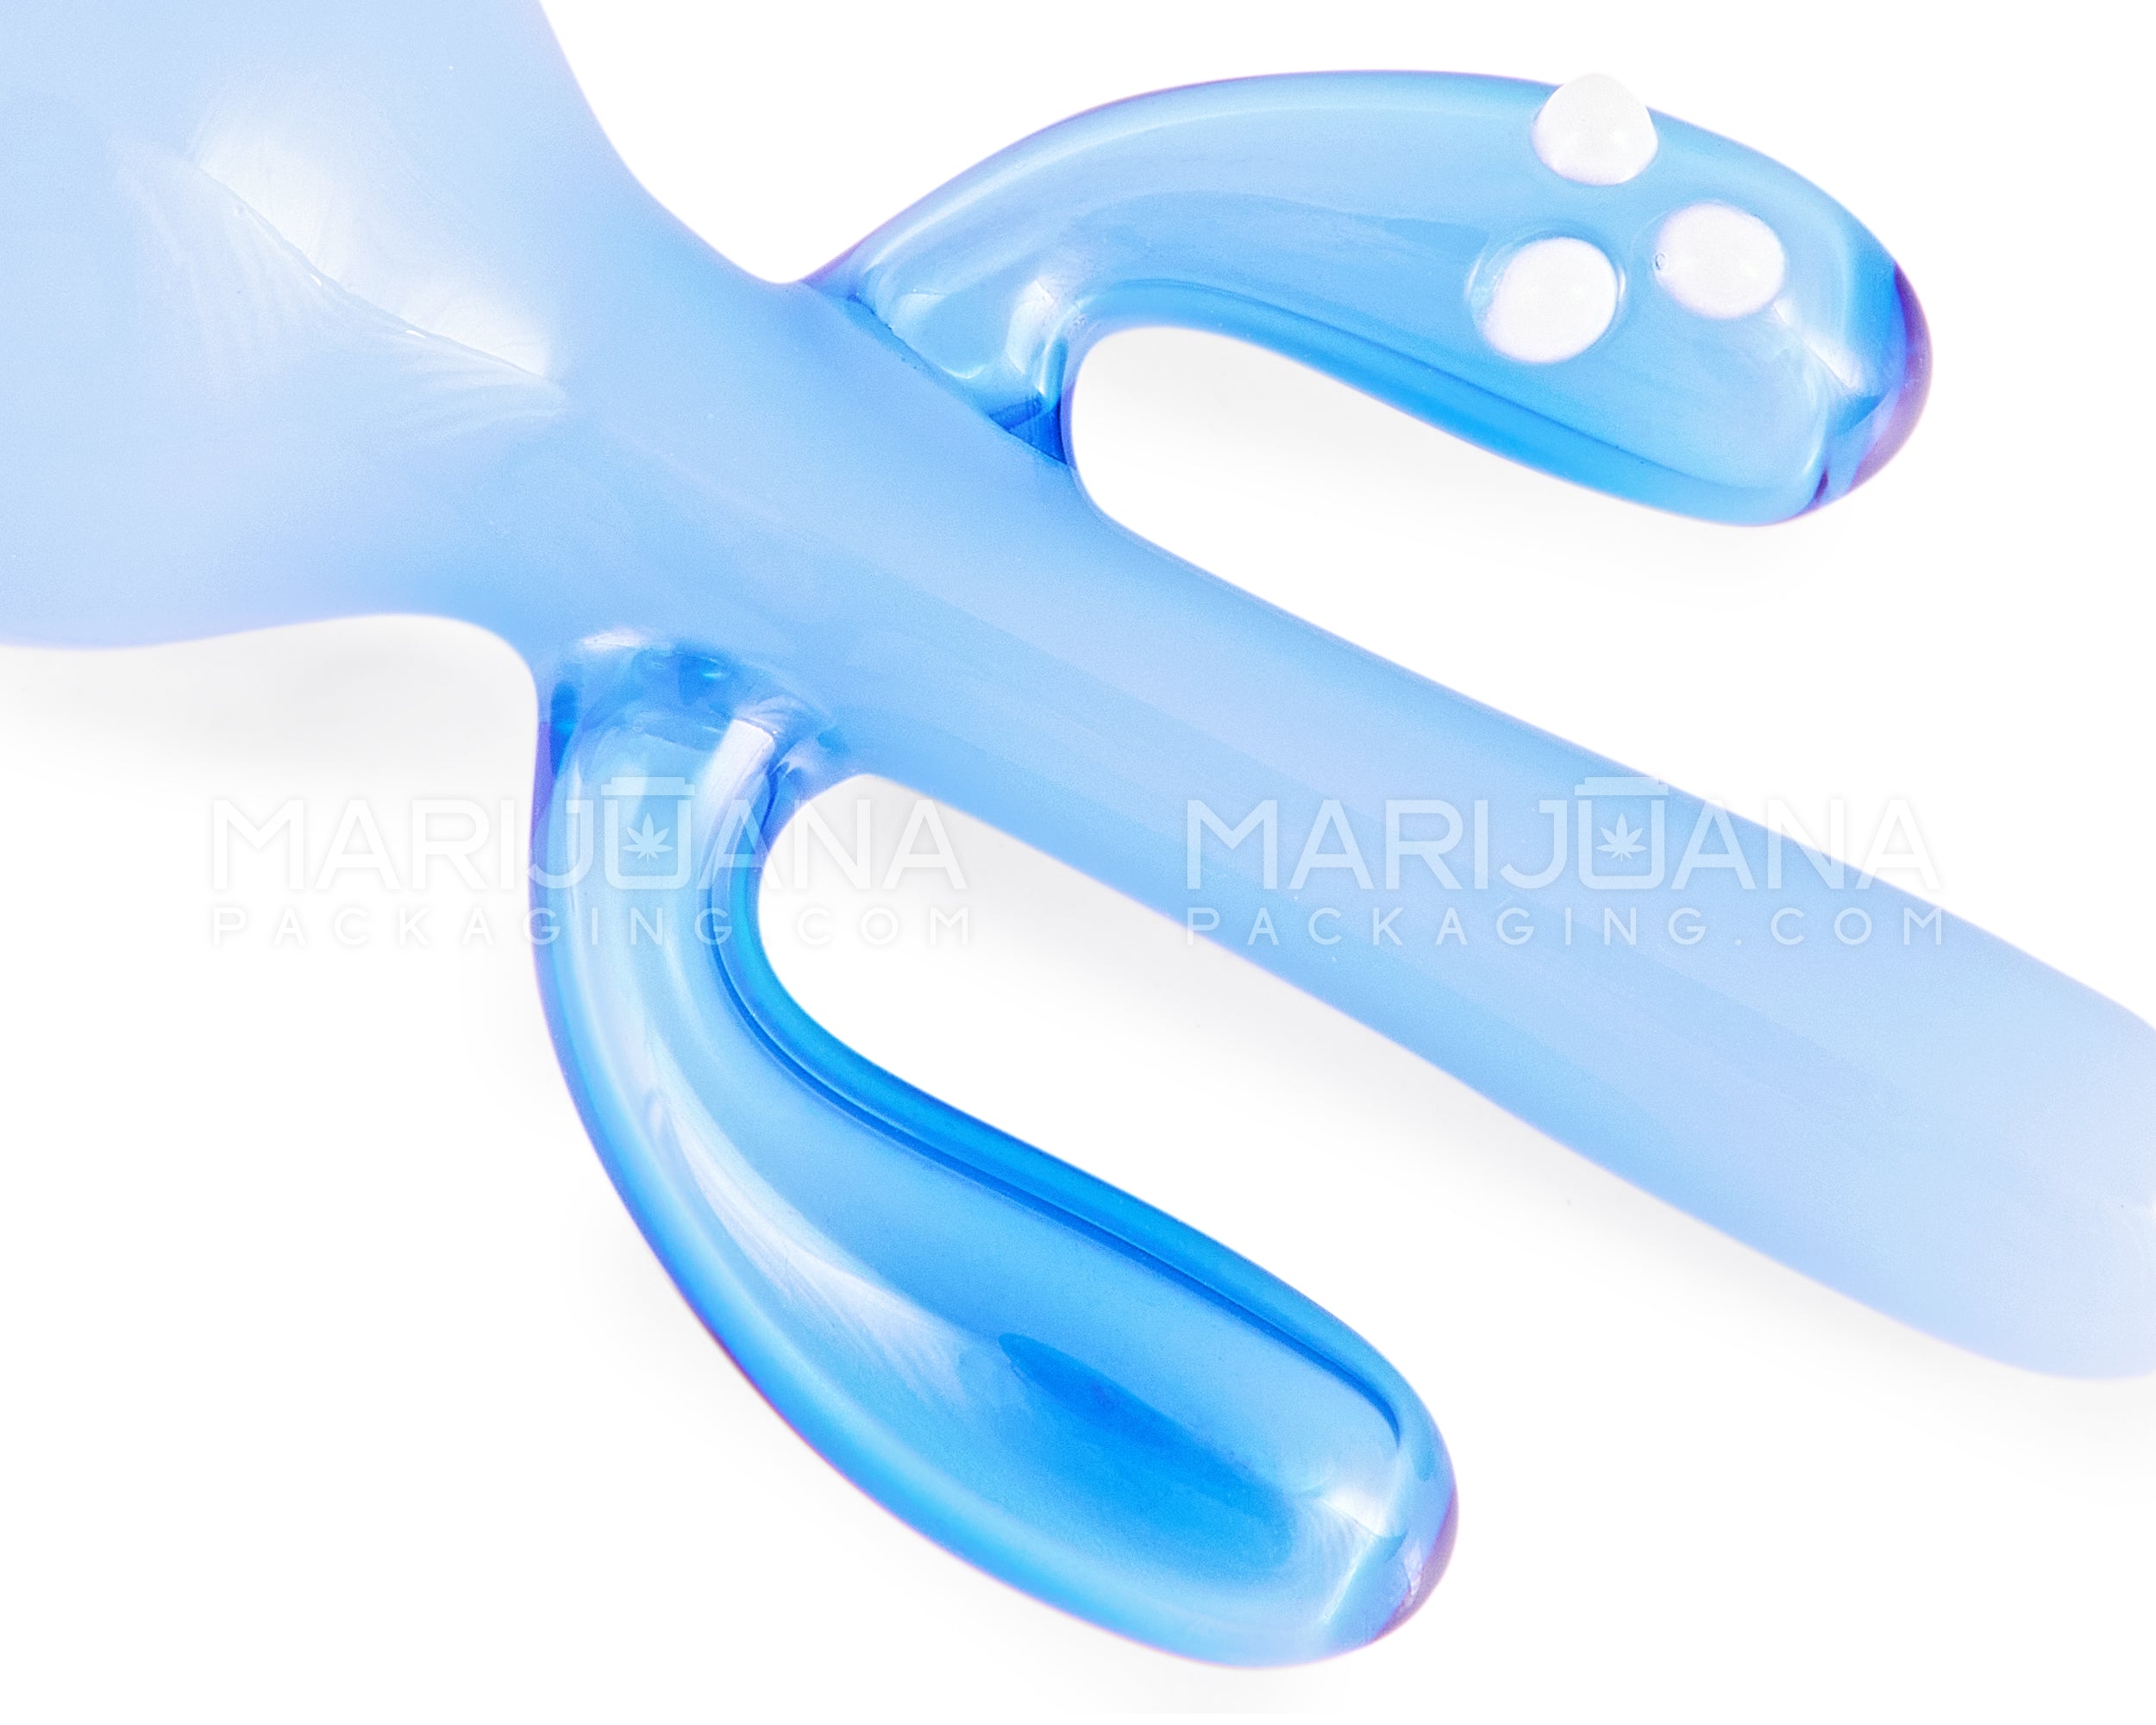 Cactus Nectar Collector Dab Pipe w/ Titanium Tip | 6in Long - 10mm Attachment - Blue - 3